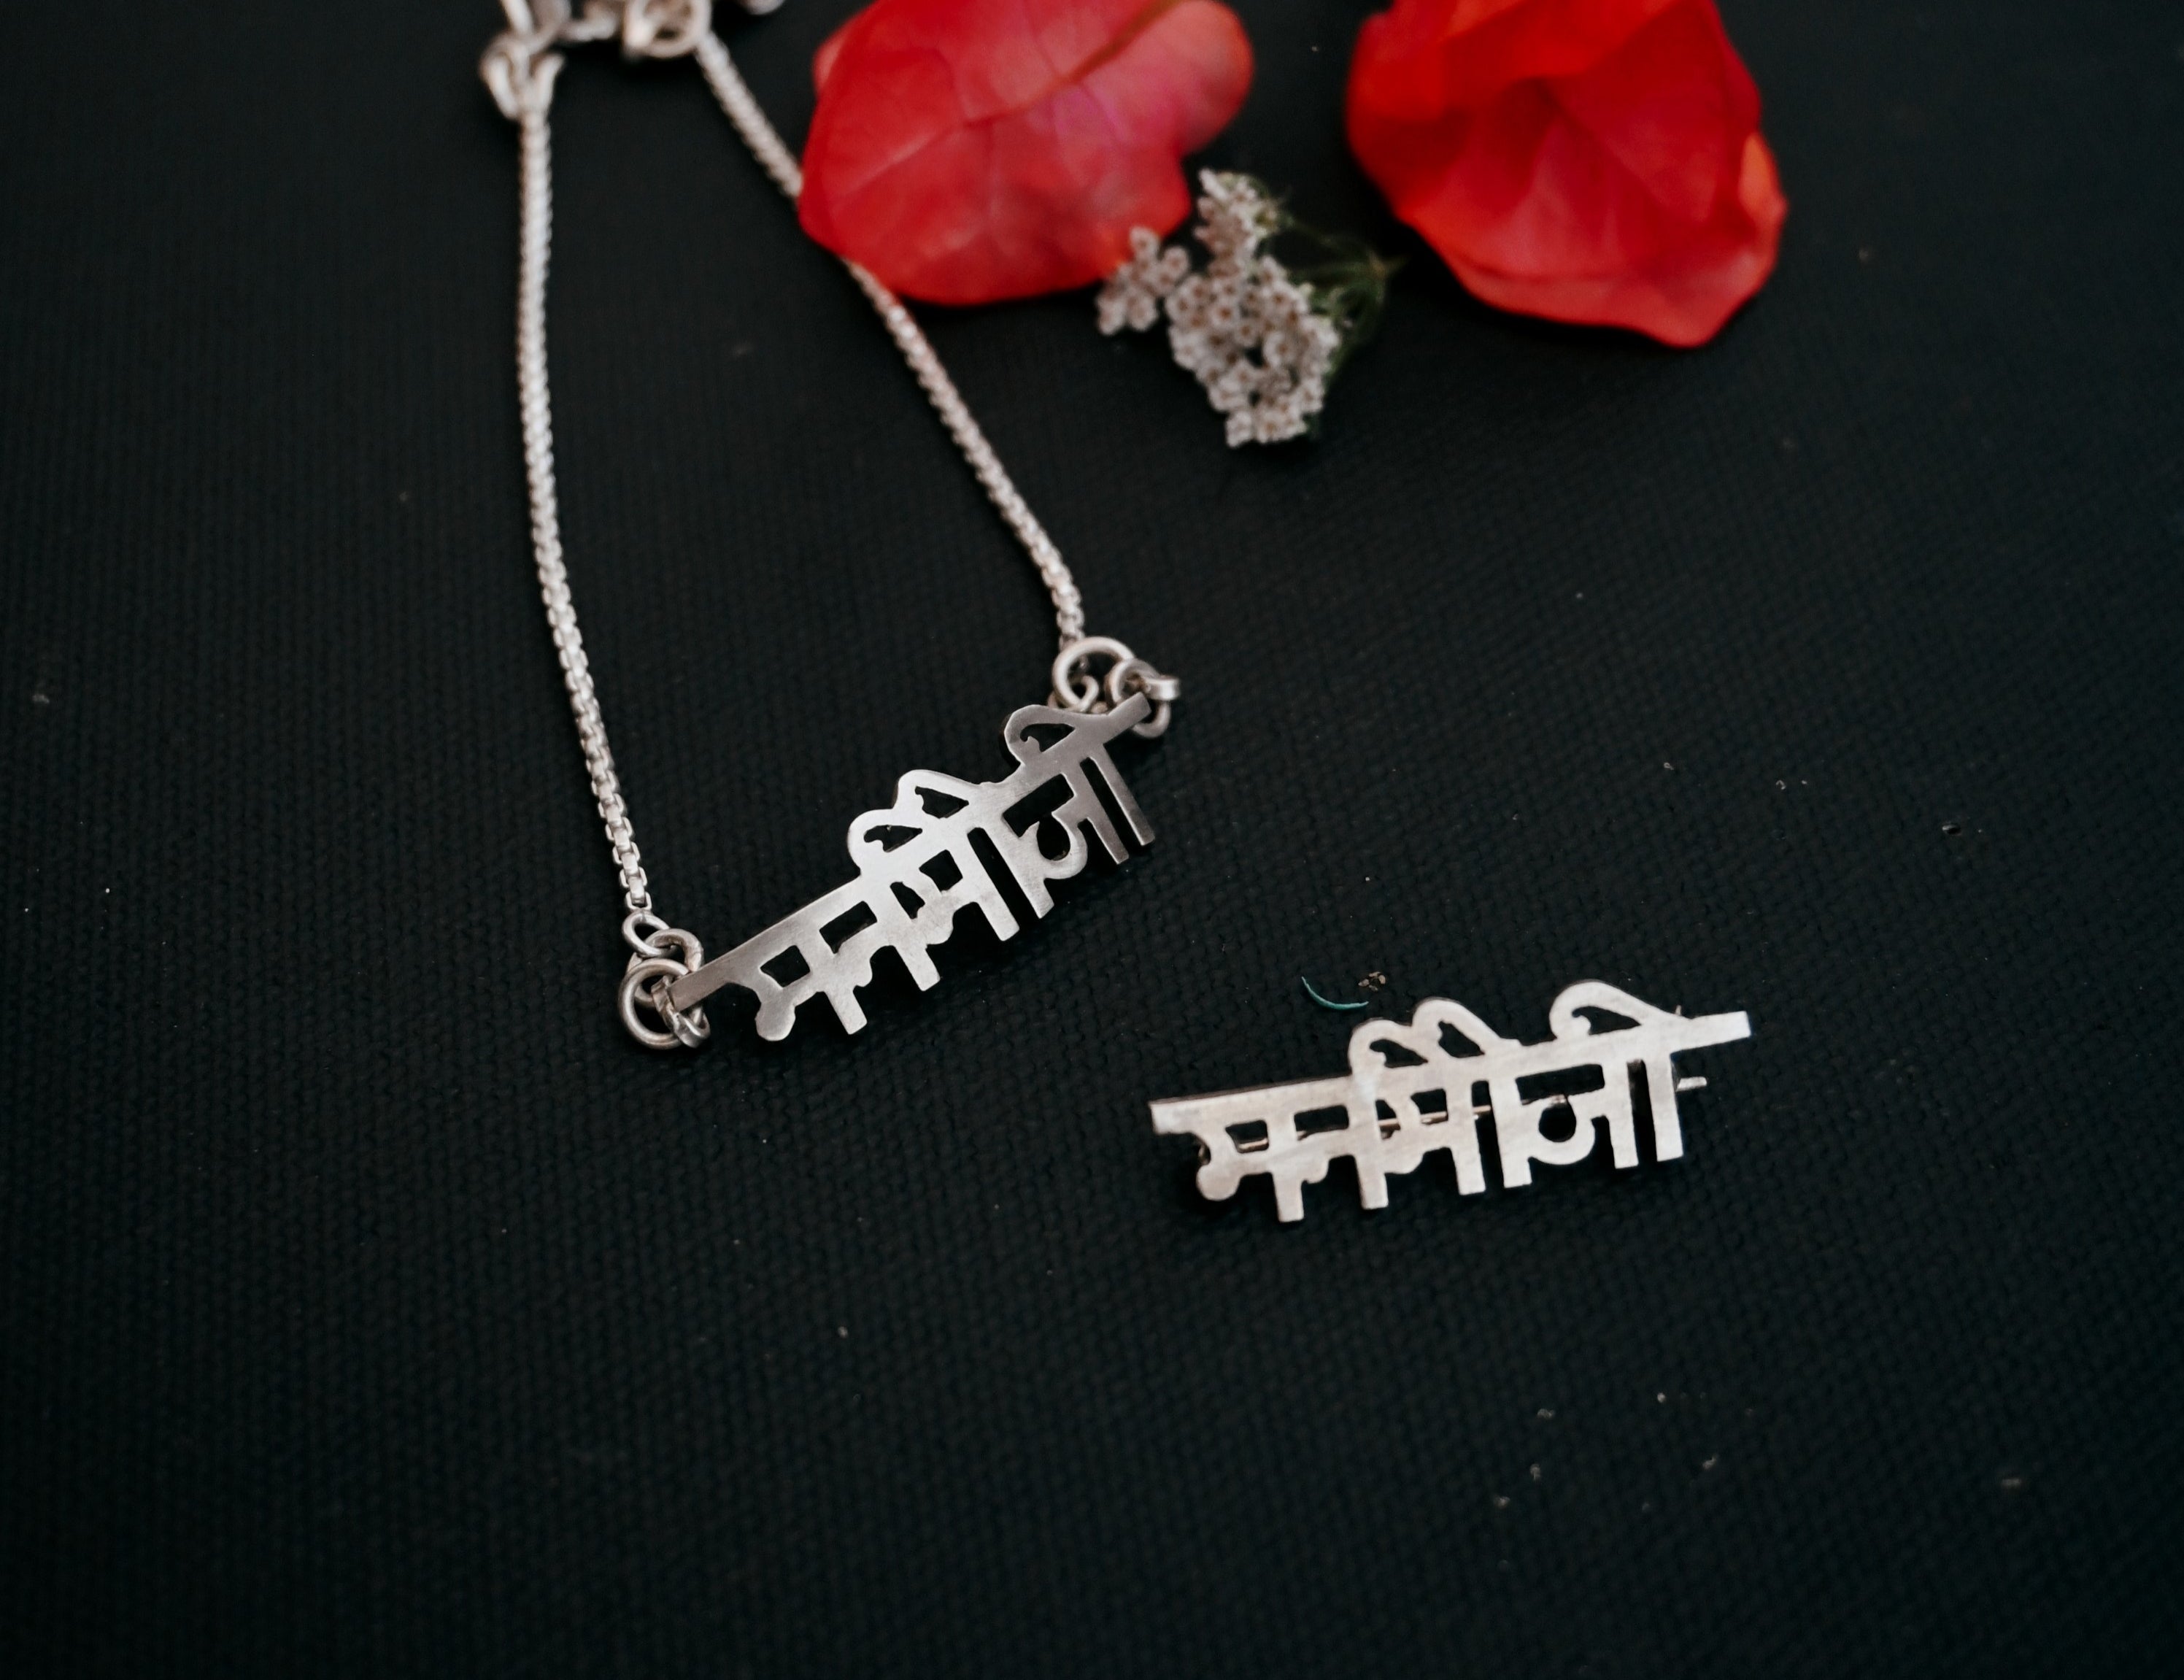 Explore Quirksmith's Manmaujis Gift Set - Ideal valentines gift, meticulously handcrafted in 92.5 Silver.